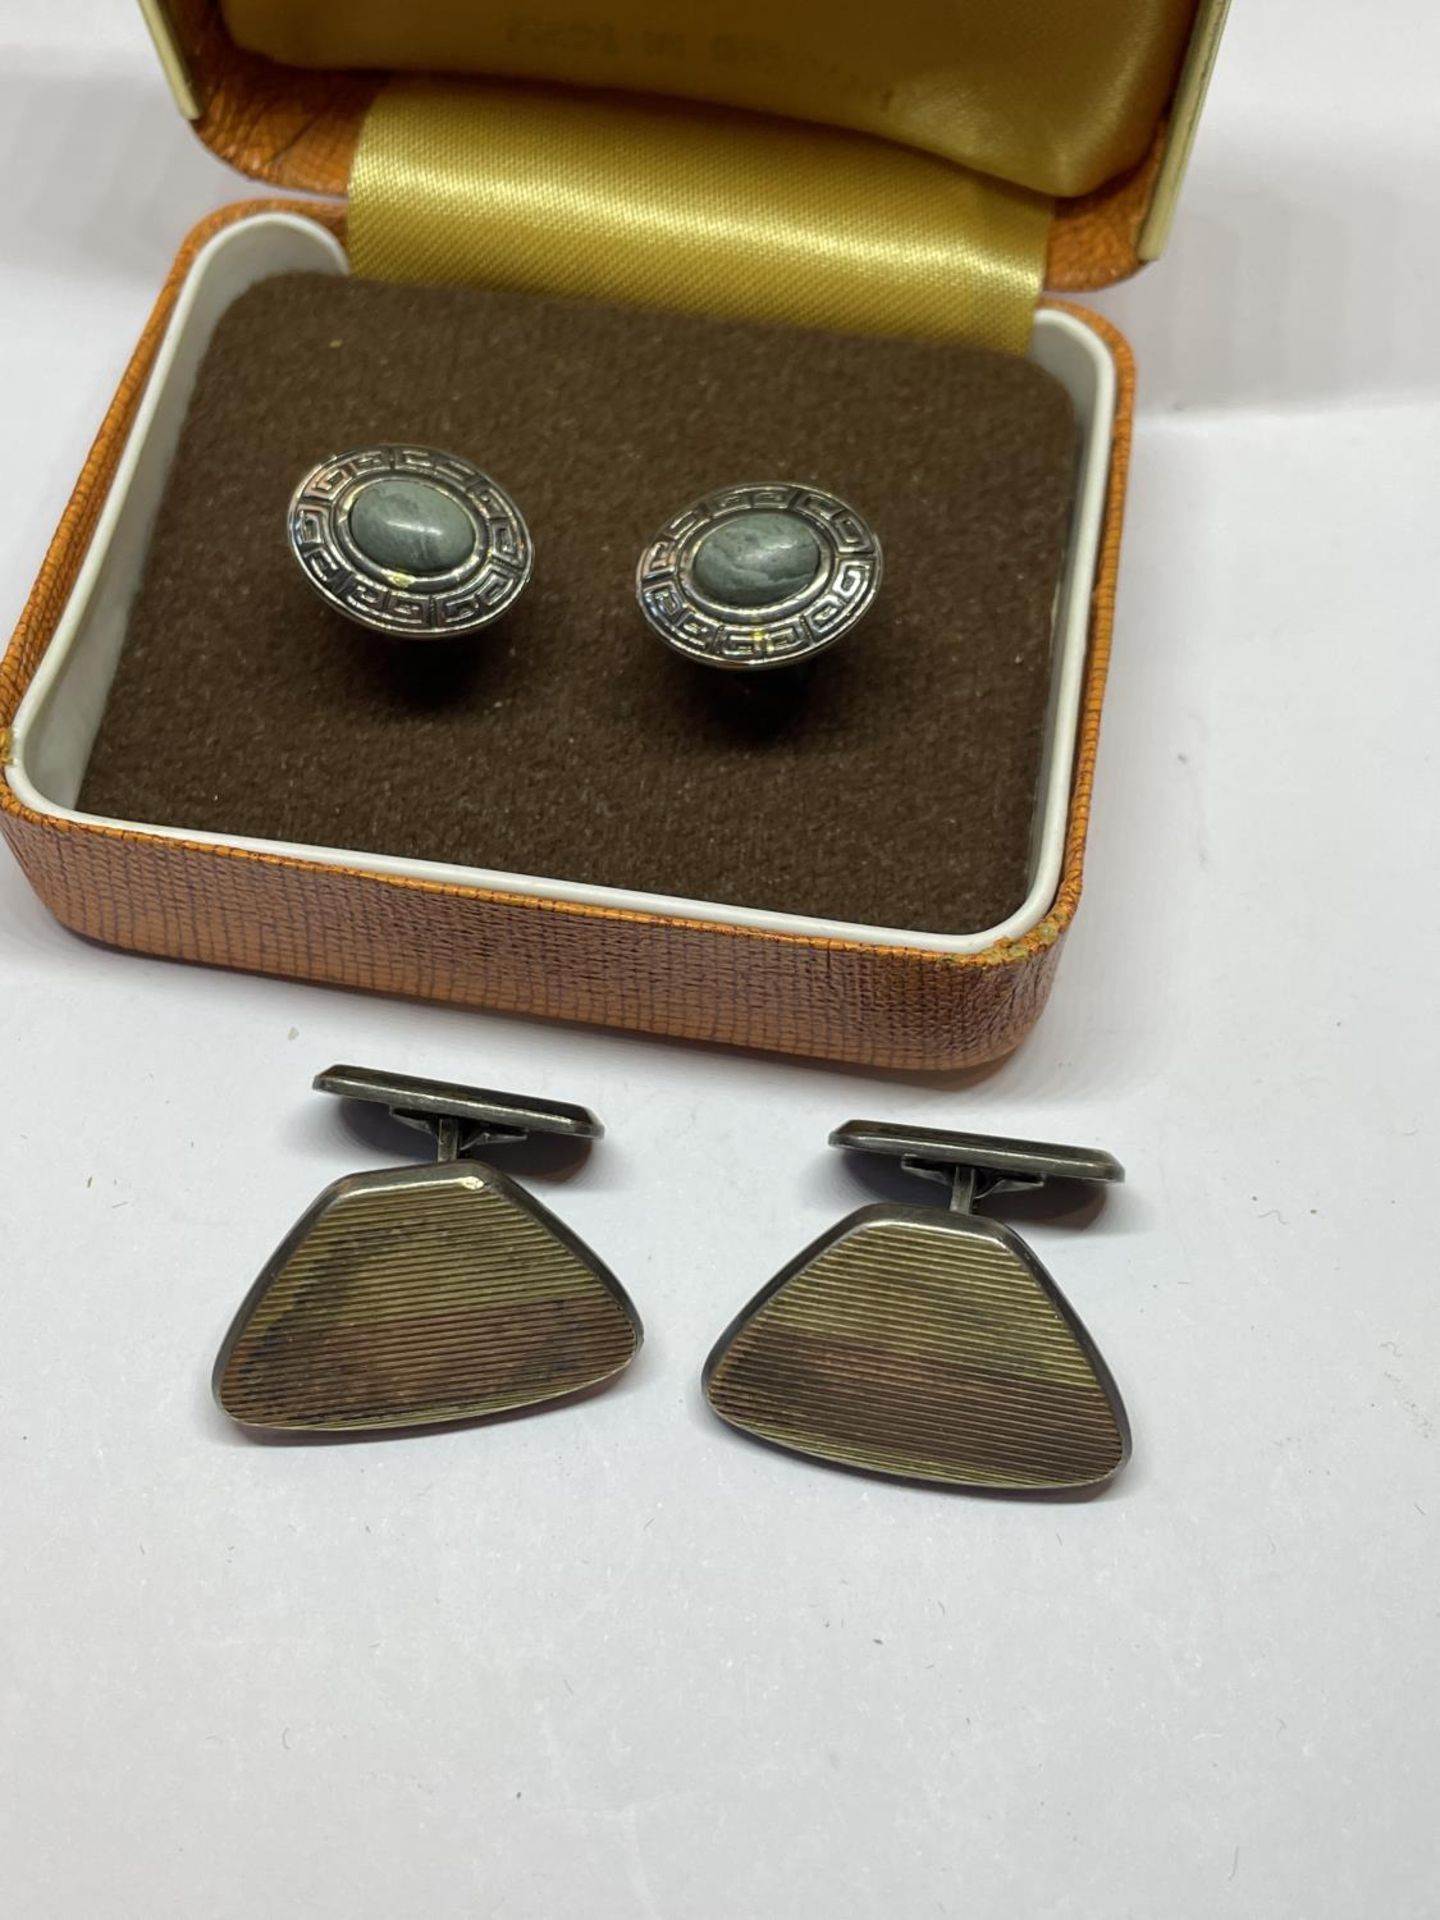 TWO PAIRS OF SILVER CUFFLINKS IN A PRESENTATION BOX